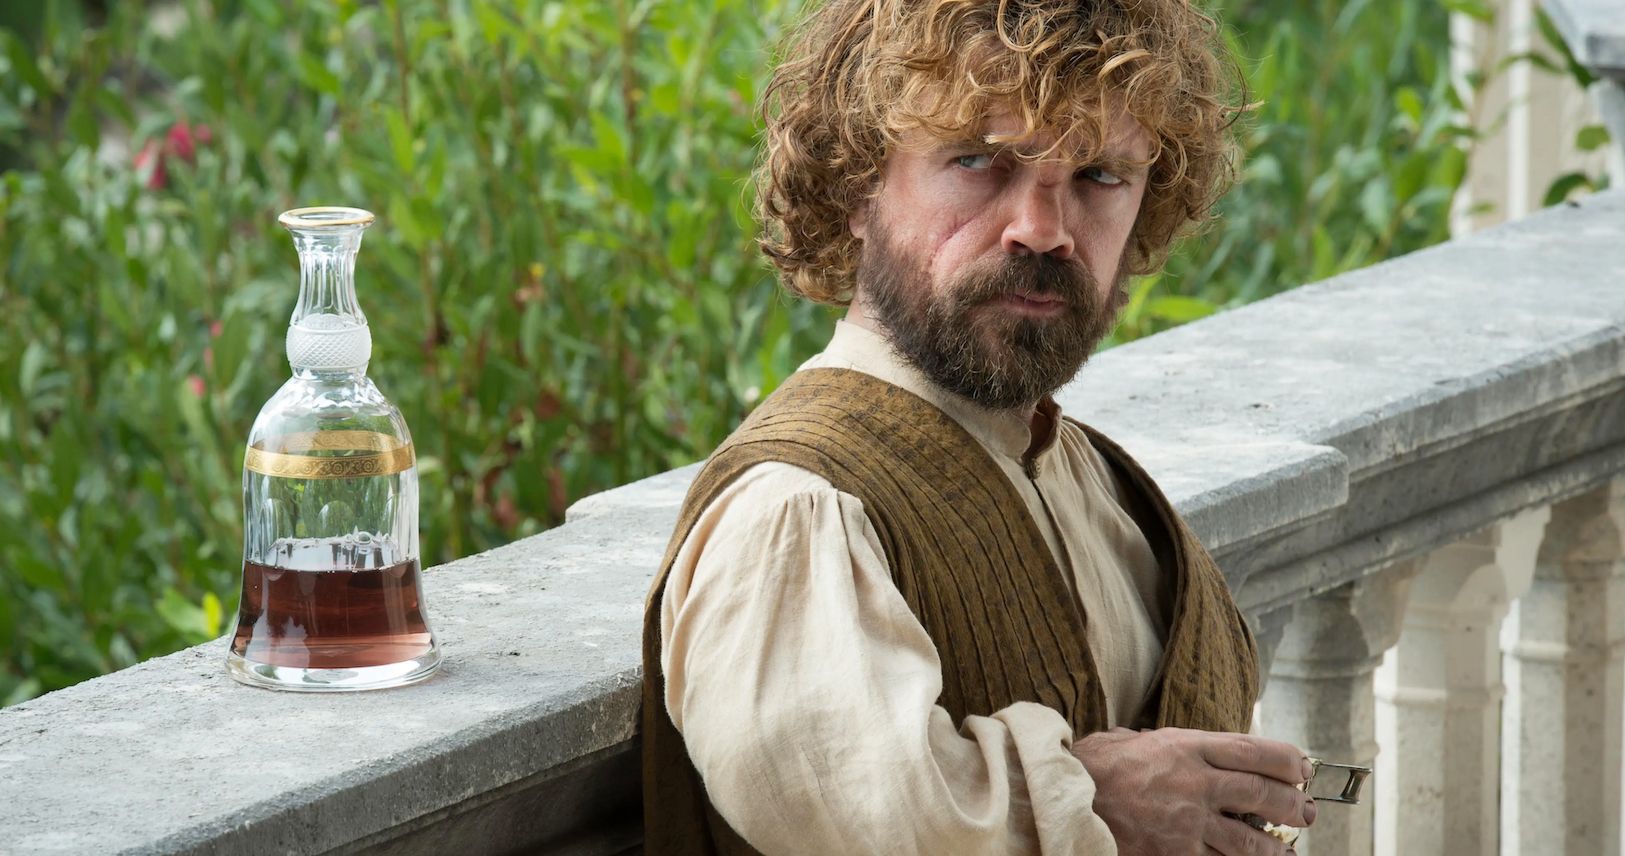 Tyrion Lannister Is the HBO Character Fans Would Most Enjoy Having Dinner With